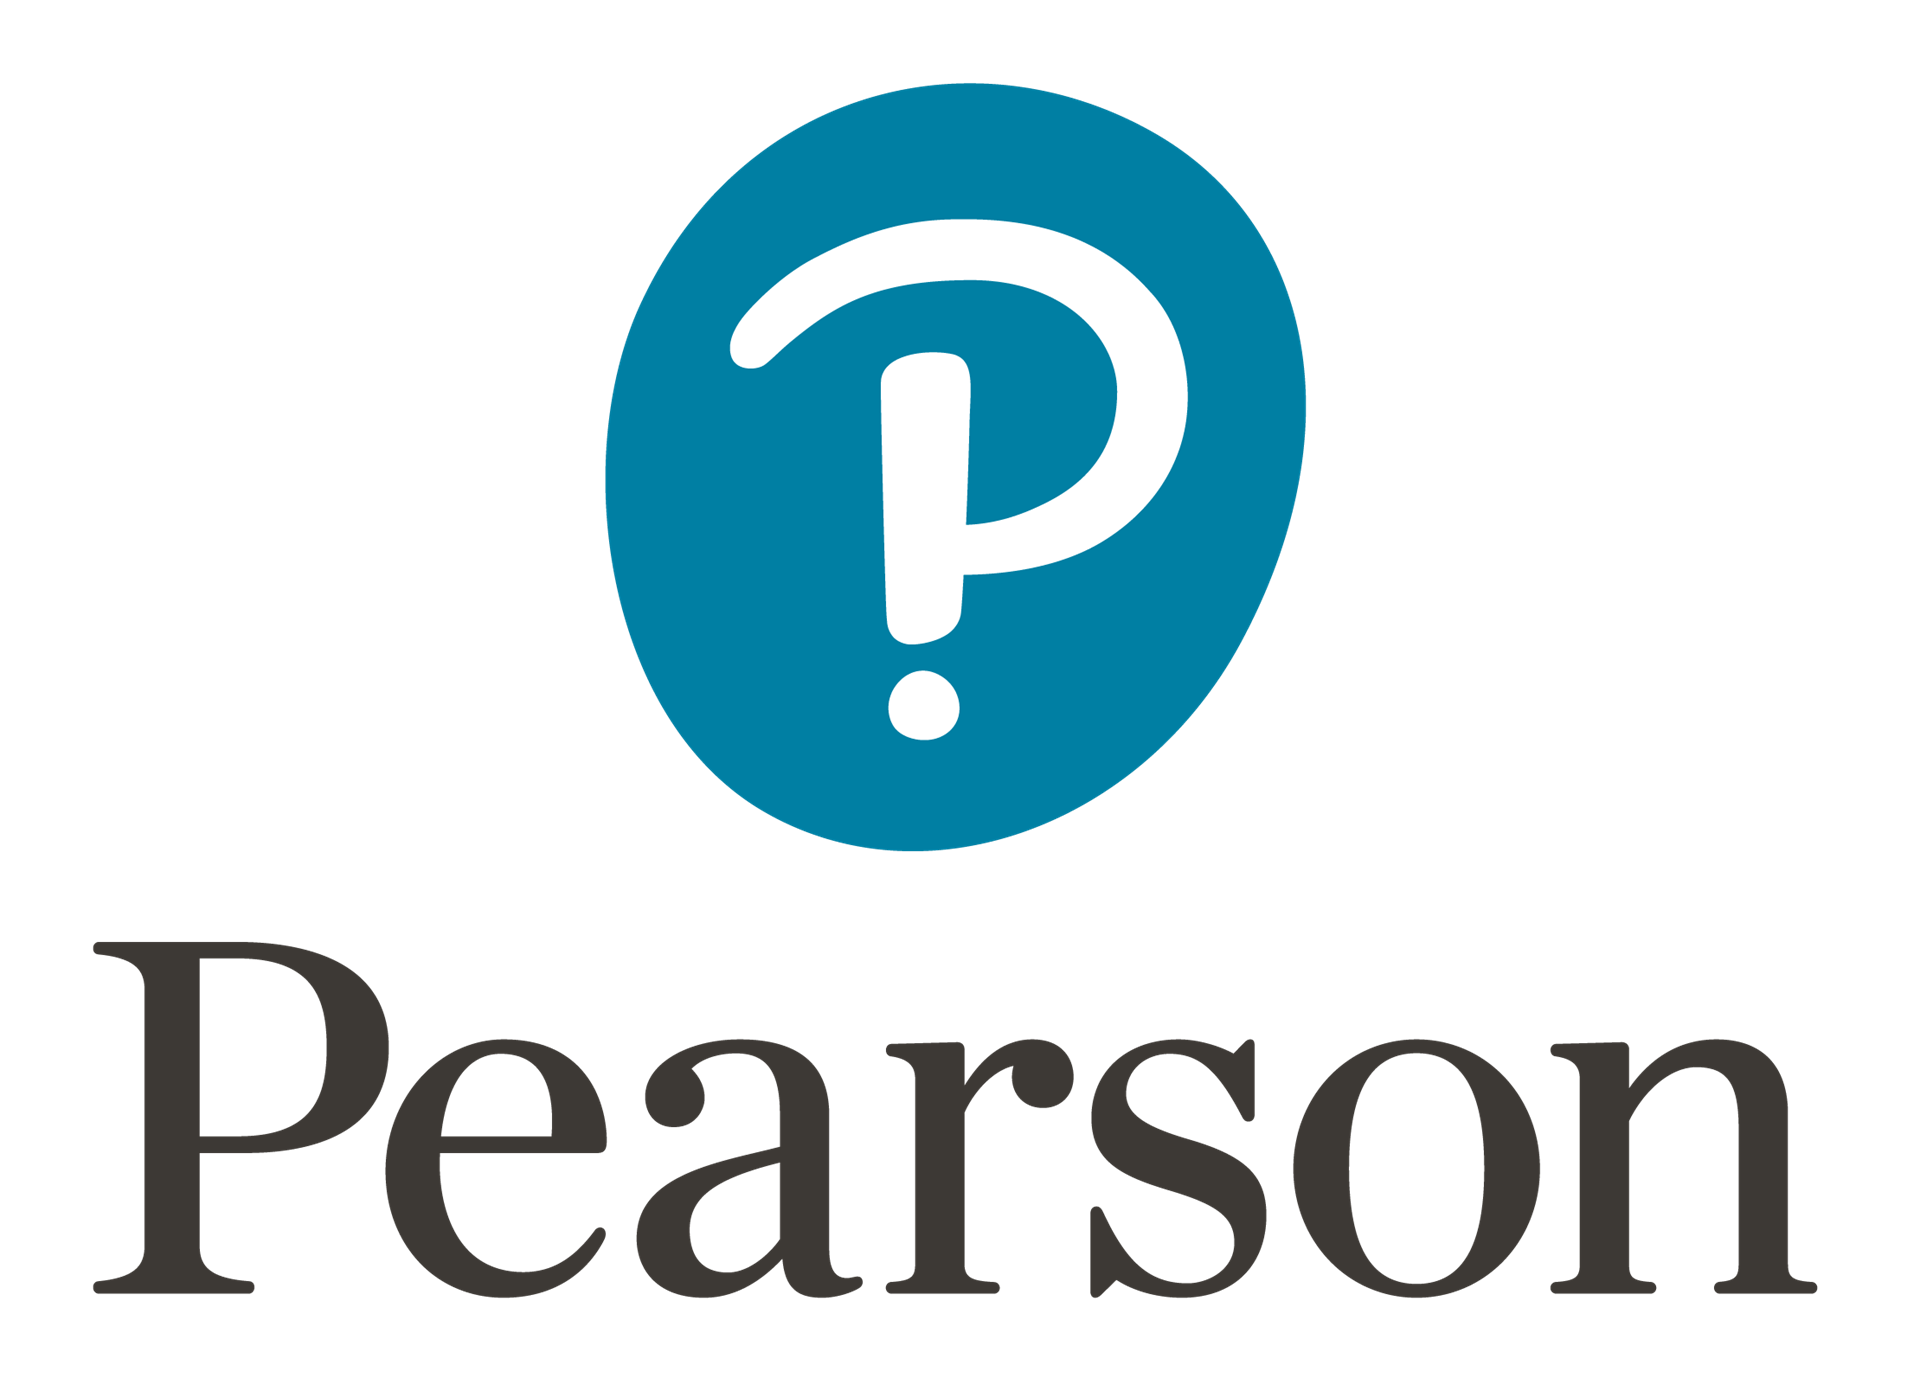 Pearson (opens in a new window)